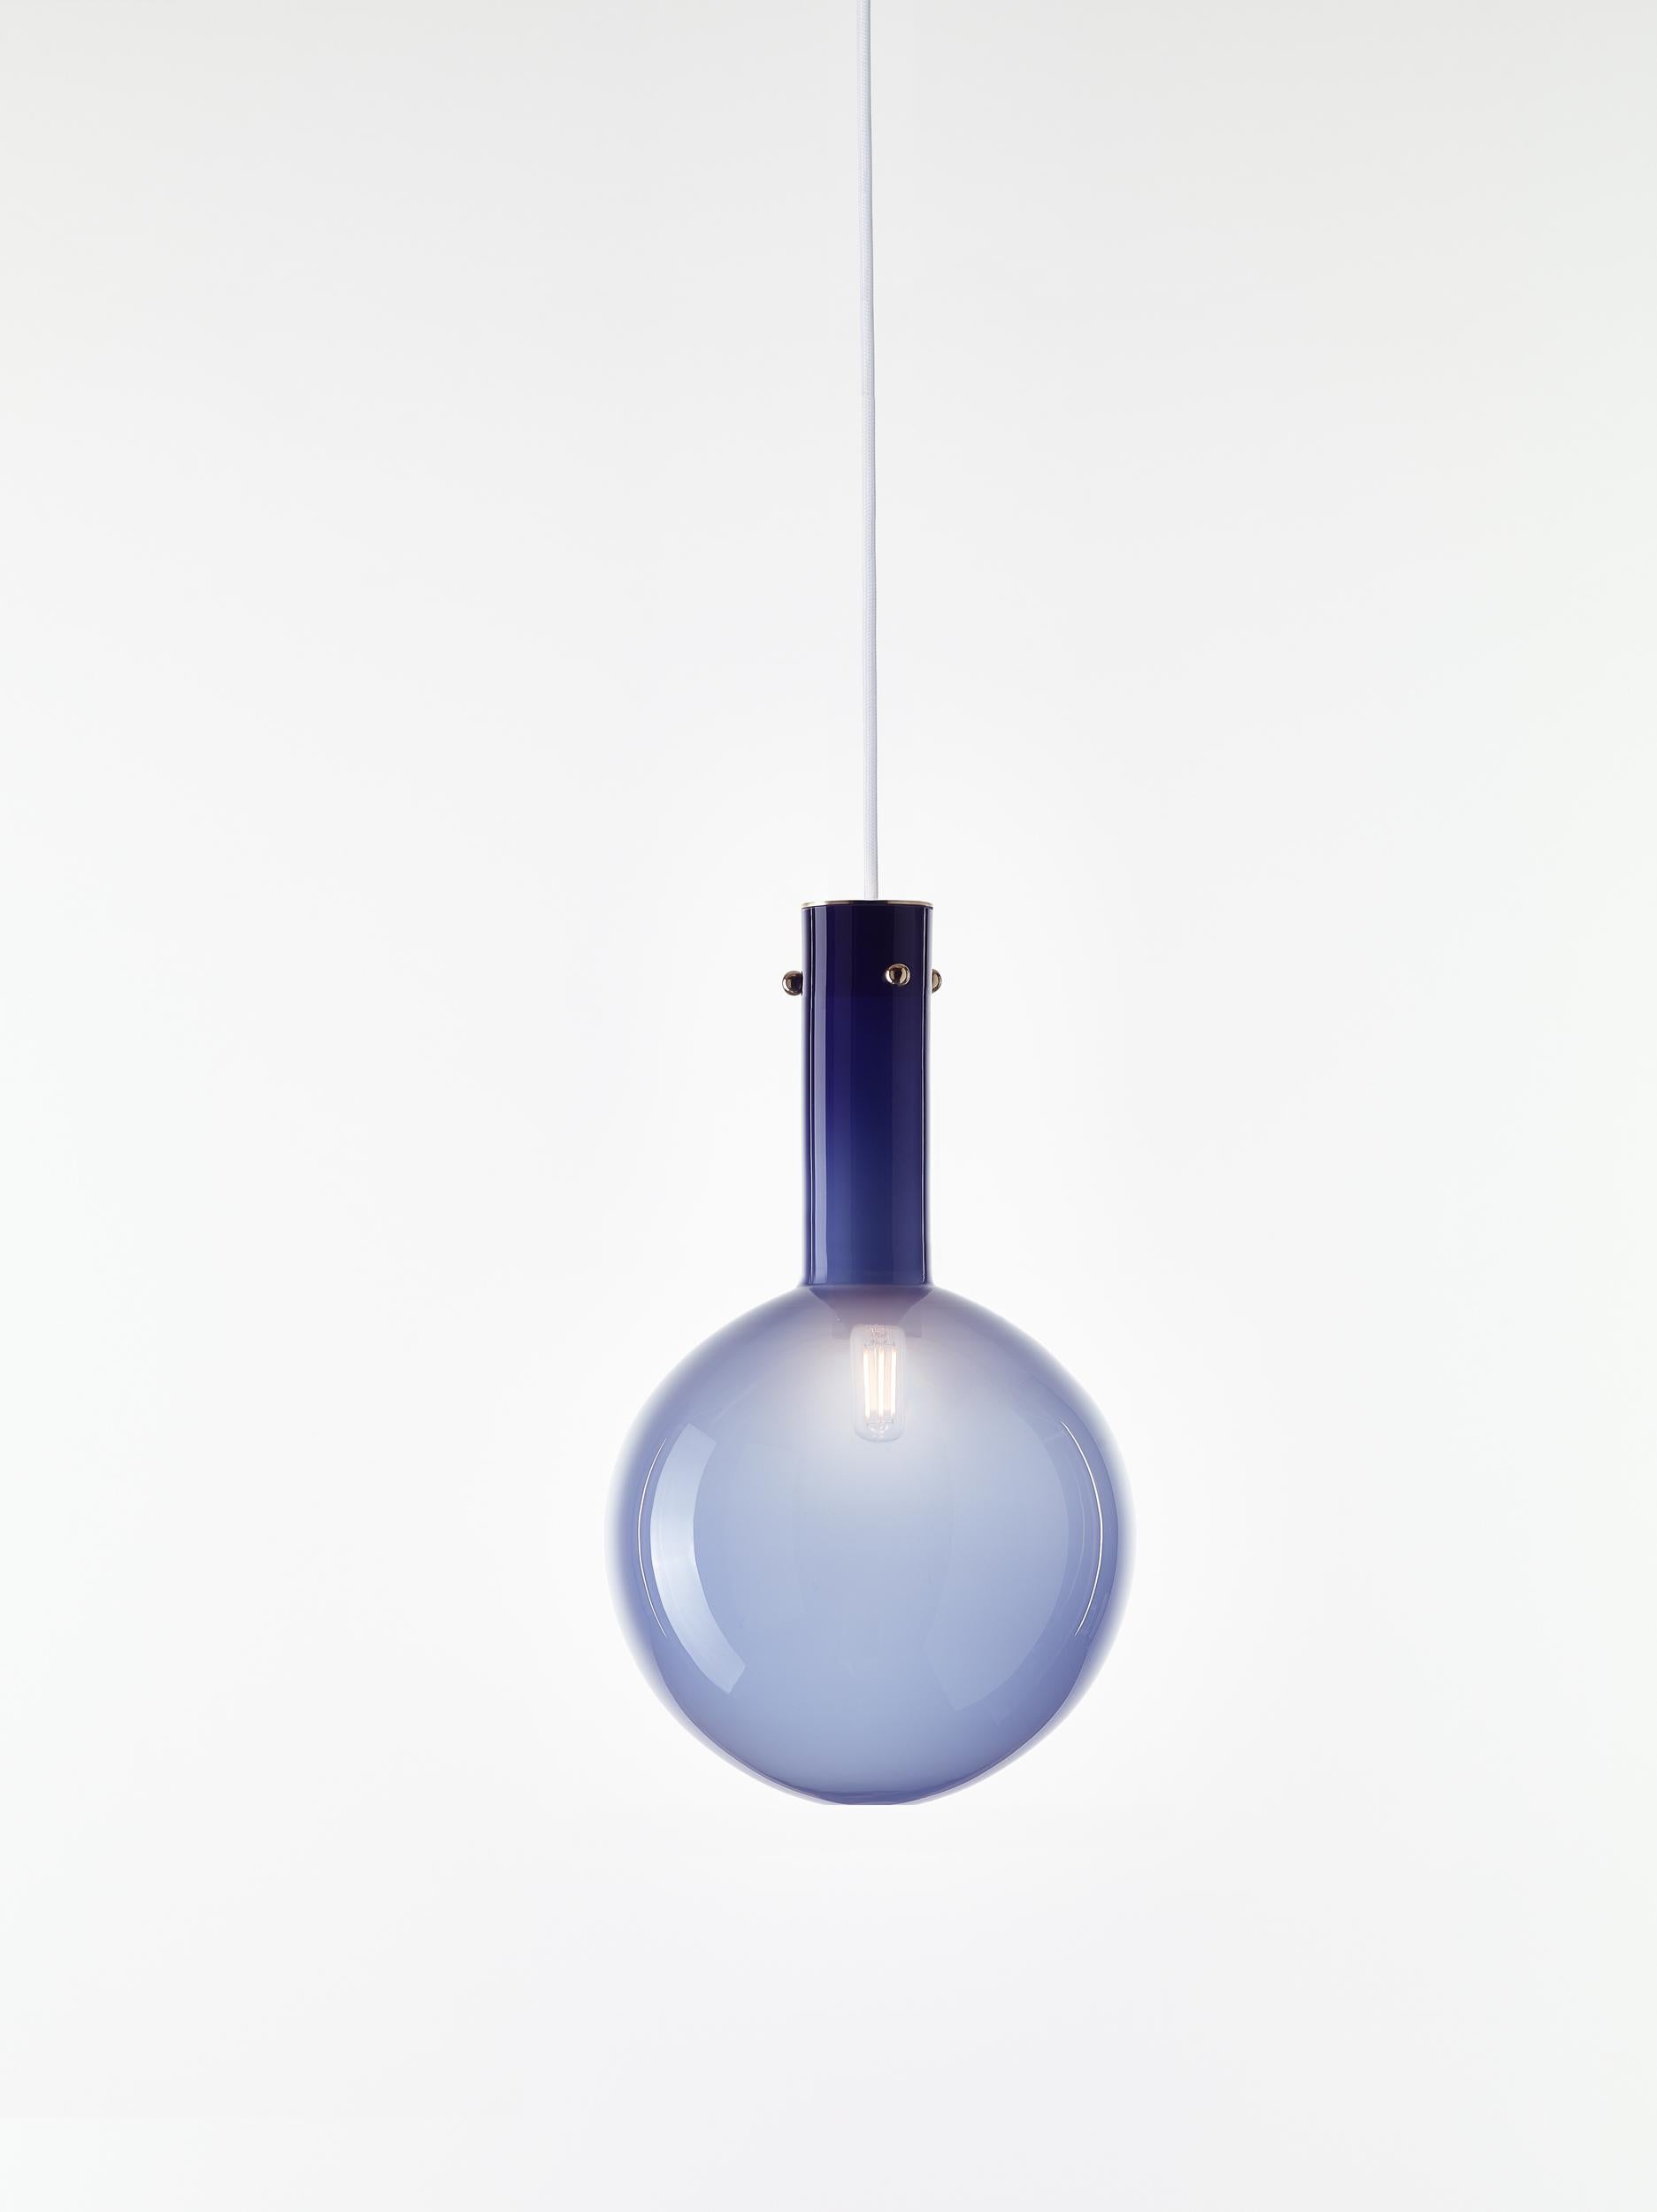 Blue Sphaerae pendant light by Dechem Studio
Dimensions: D 20 x H 180 cm
Materials: brass, metal, glass.
Also available: different finishes and colors available.

Only one homogenous piece of hand-blown glass creates the main body of Sphaerae